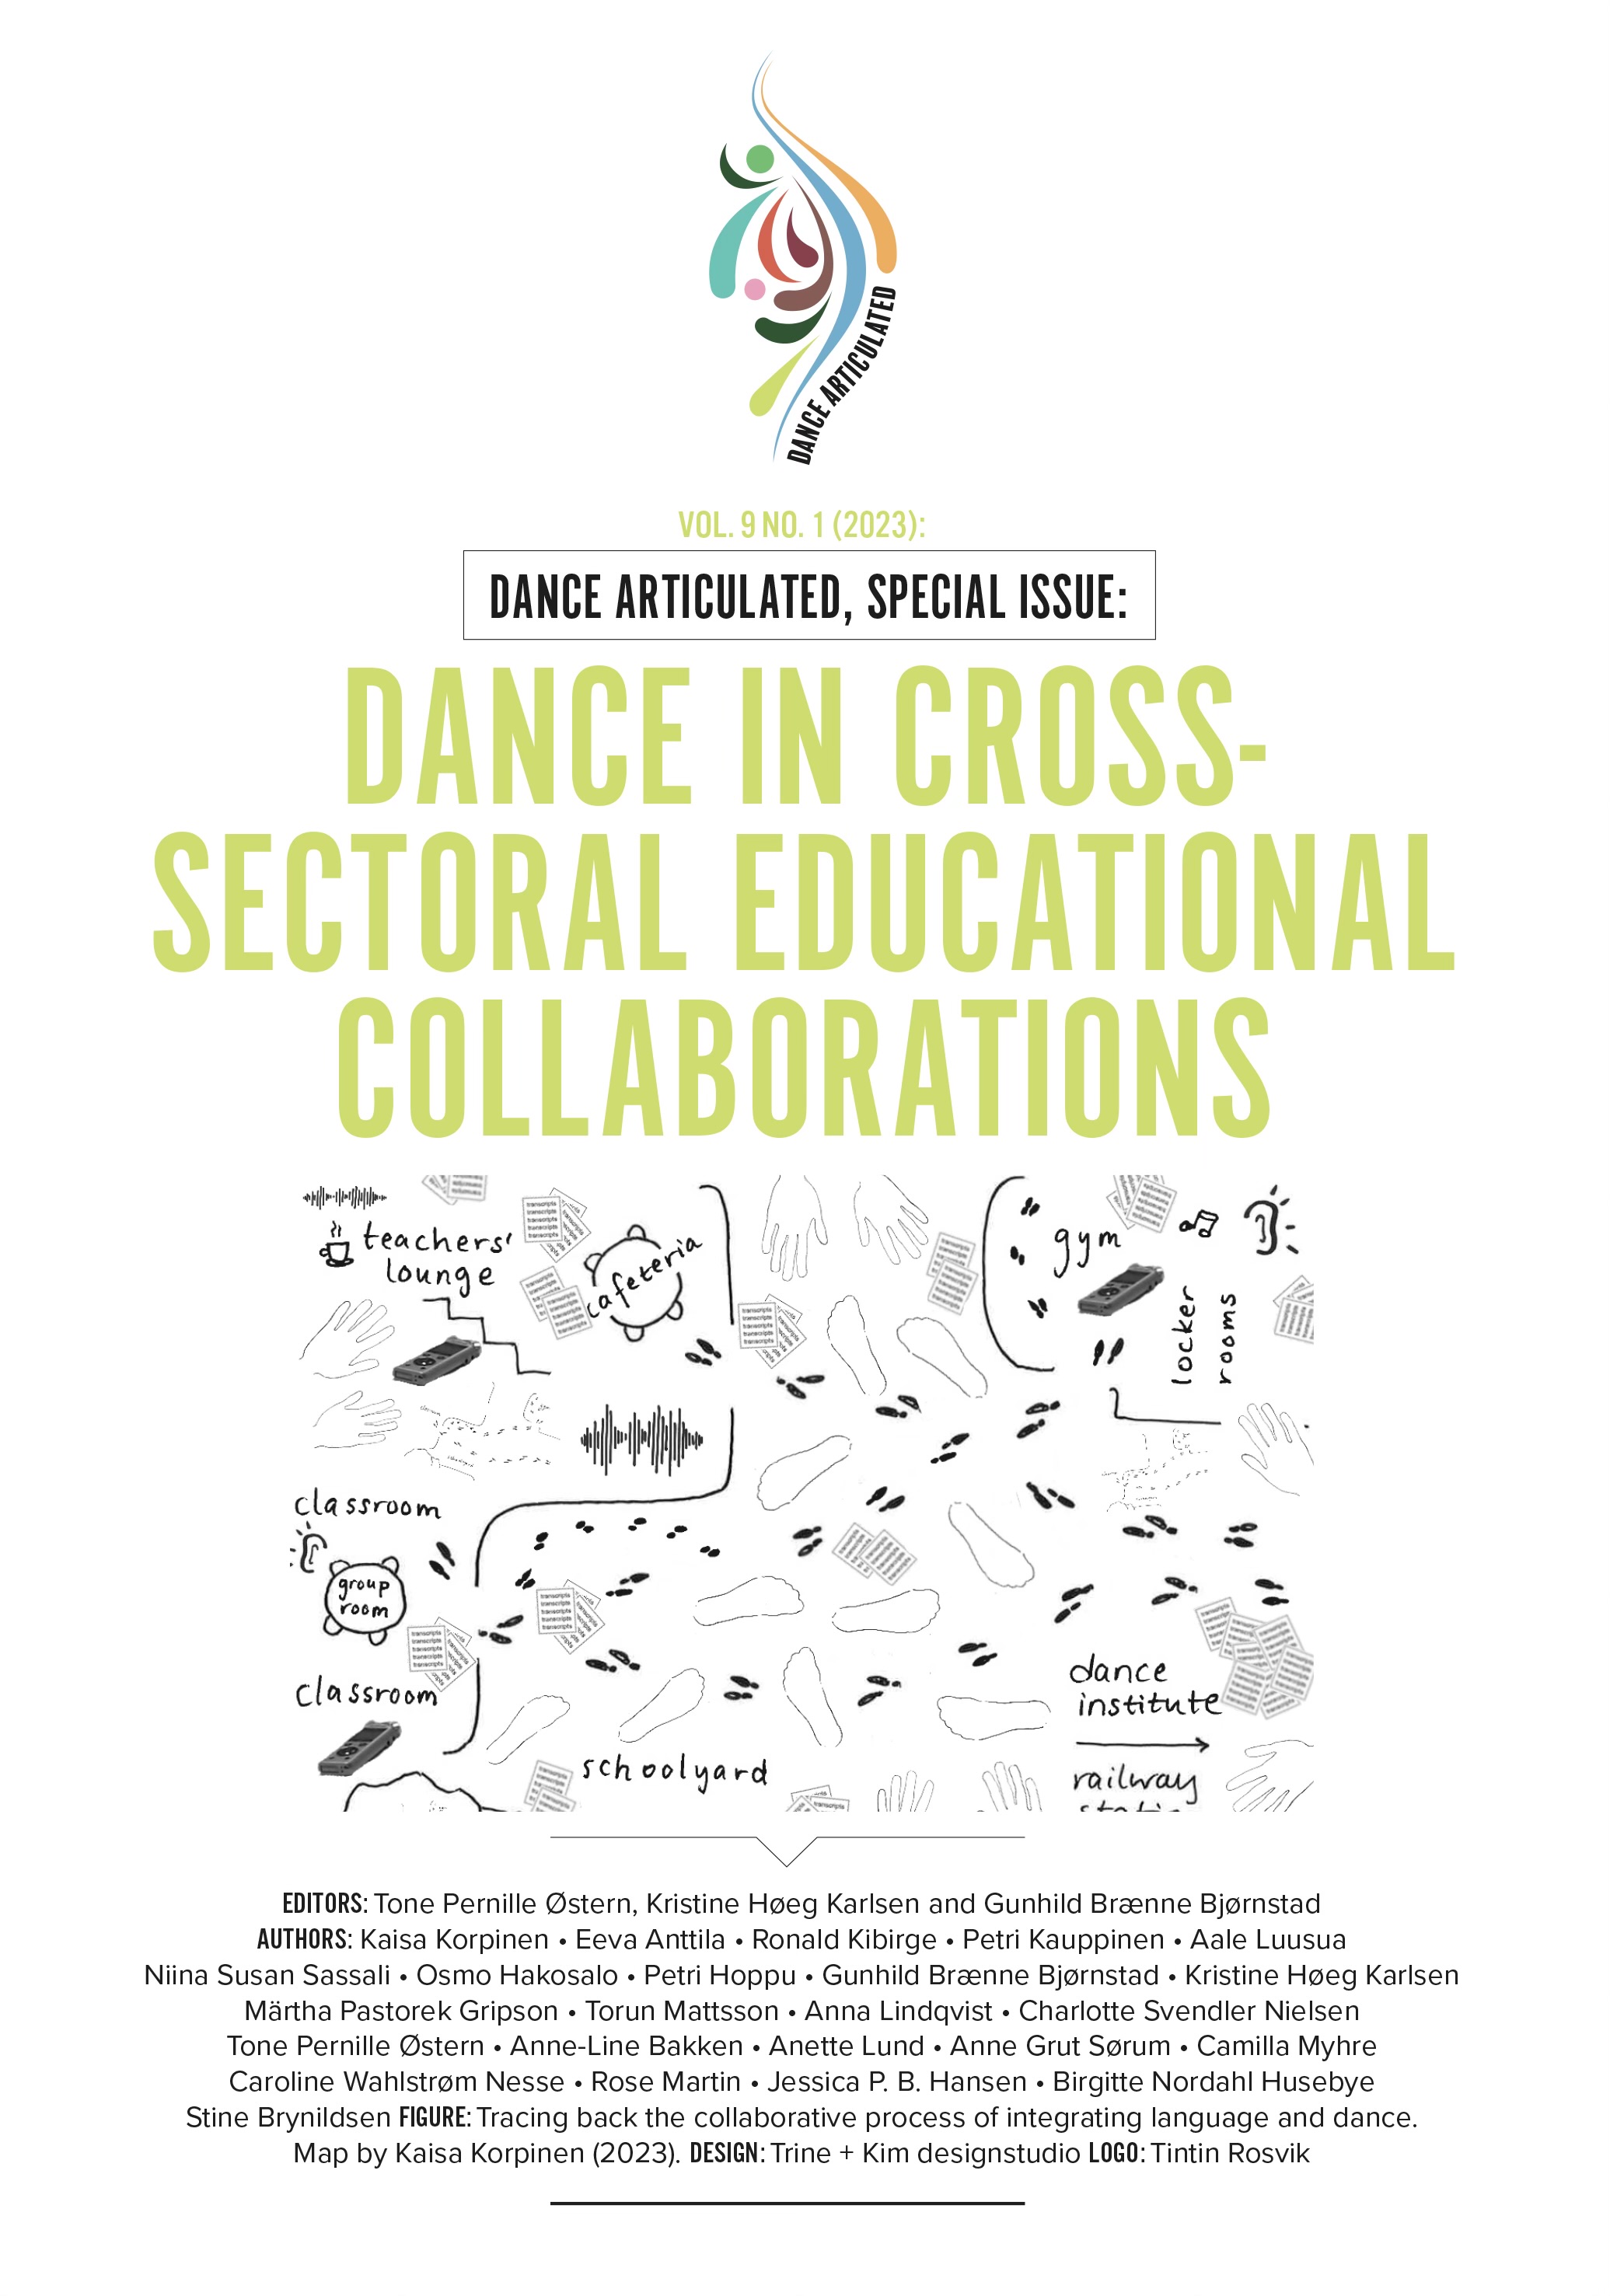 					Se Årg. 9 Nr. 1 (2023): Dance in cross-sectoral educational collaborations
				